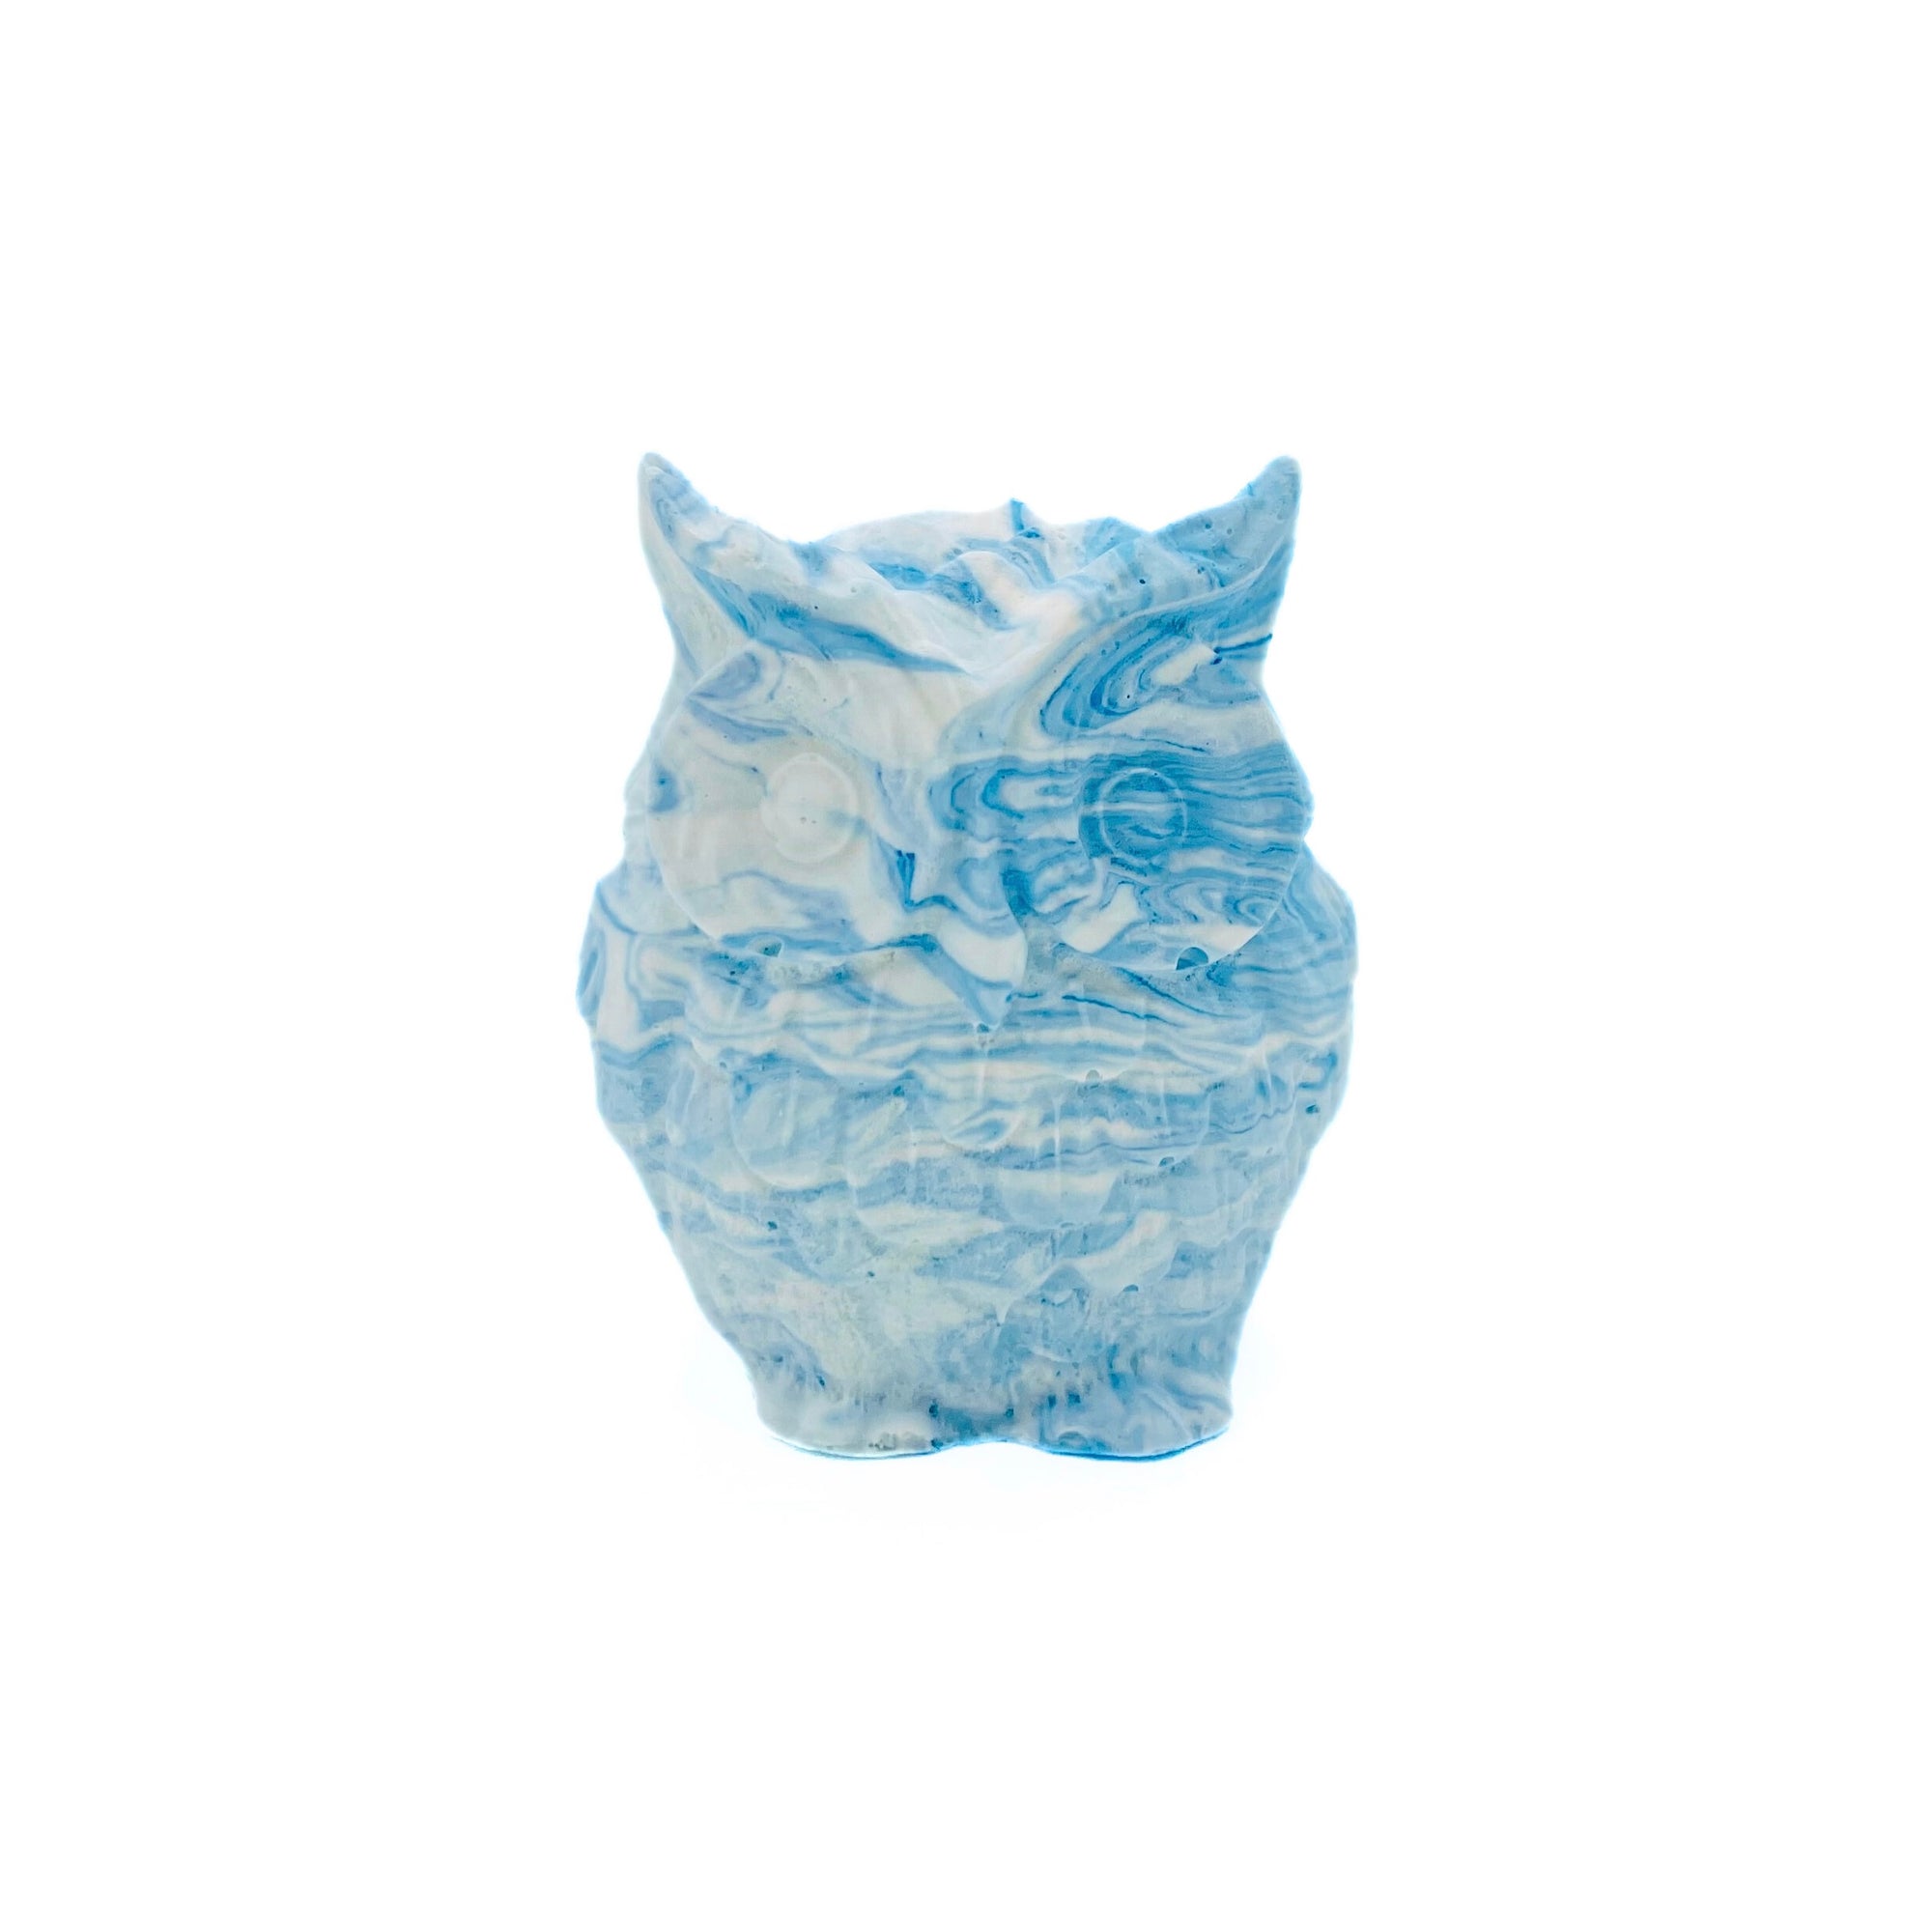 A small owl made from Jesmonite measuring 5cm in height marbled with baby blue pigment.